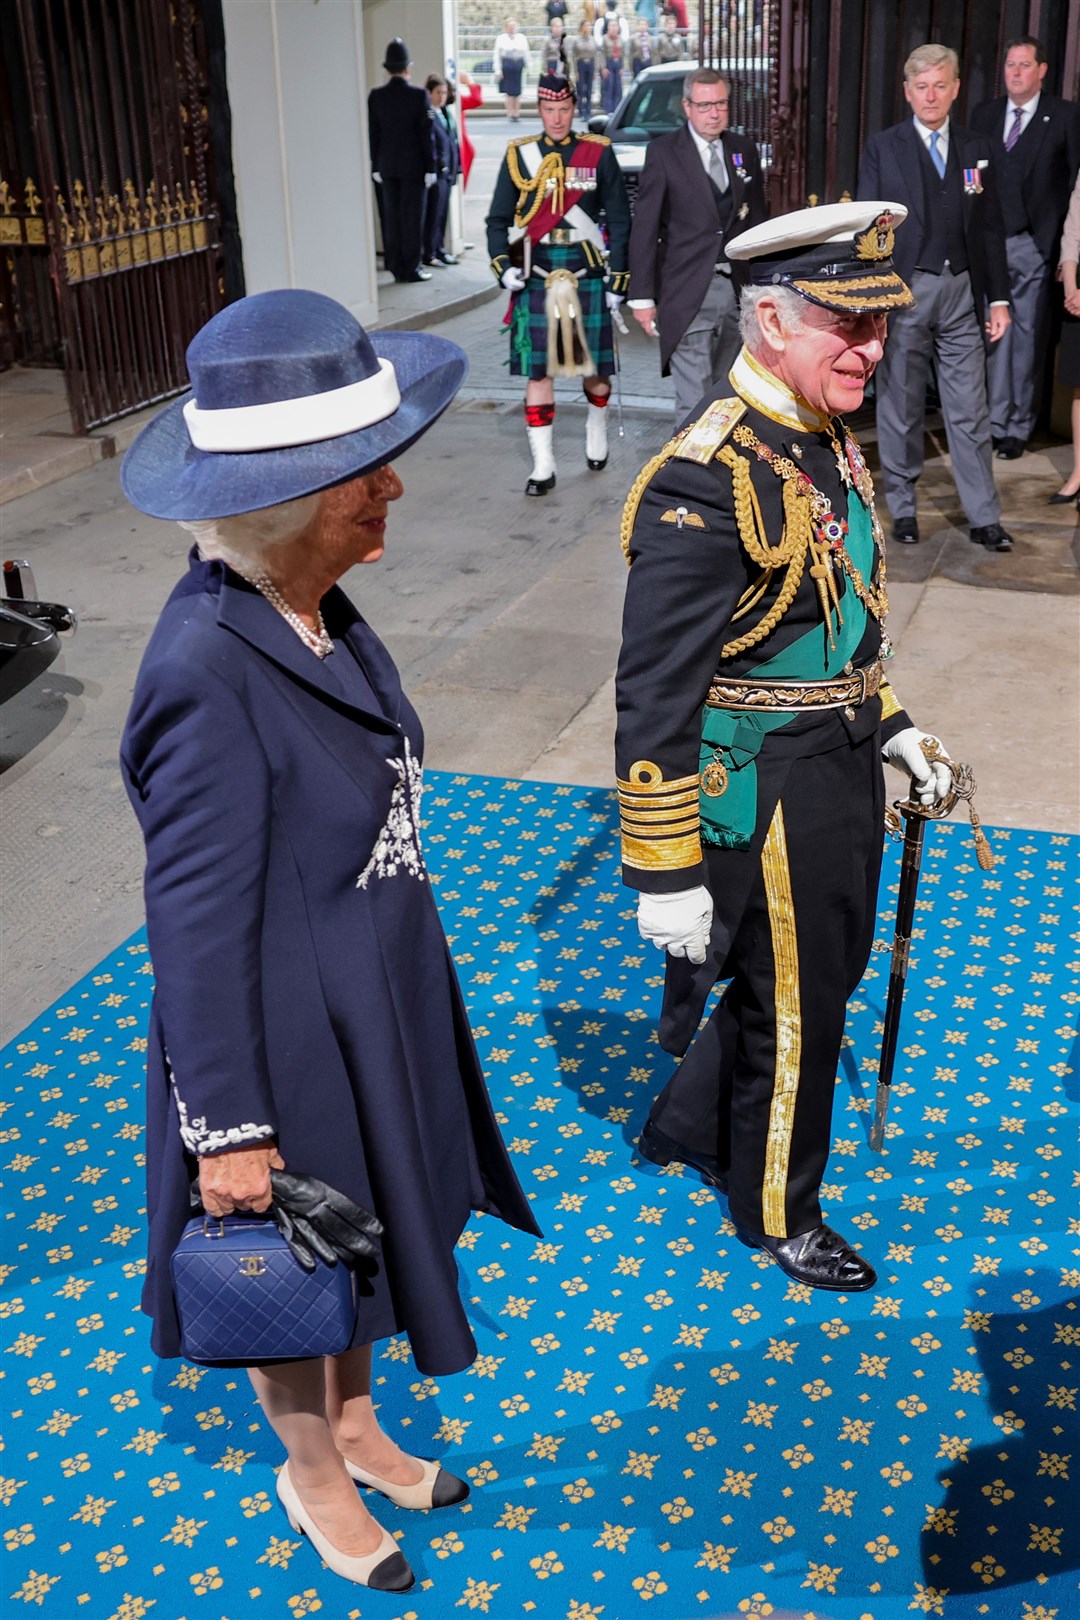 Charles and the Duchess of Cornwall were all smiles as they arrived at the Sovereign’s Entrance to the Palace of Westminster (Chris Jackson/PA)